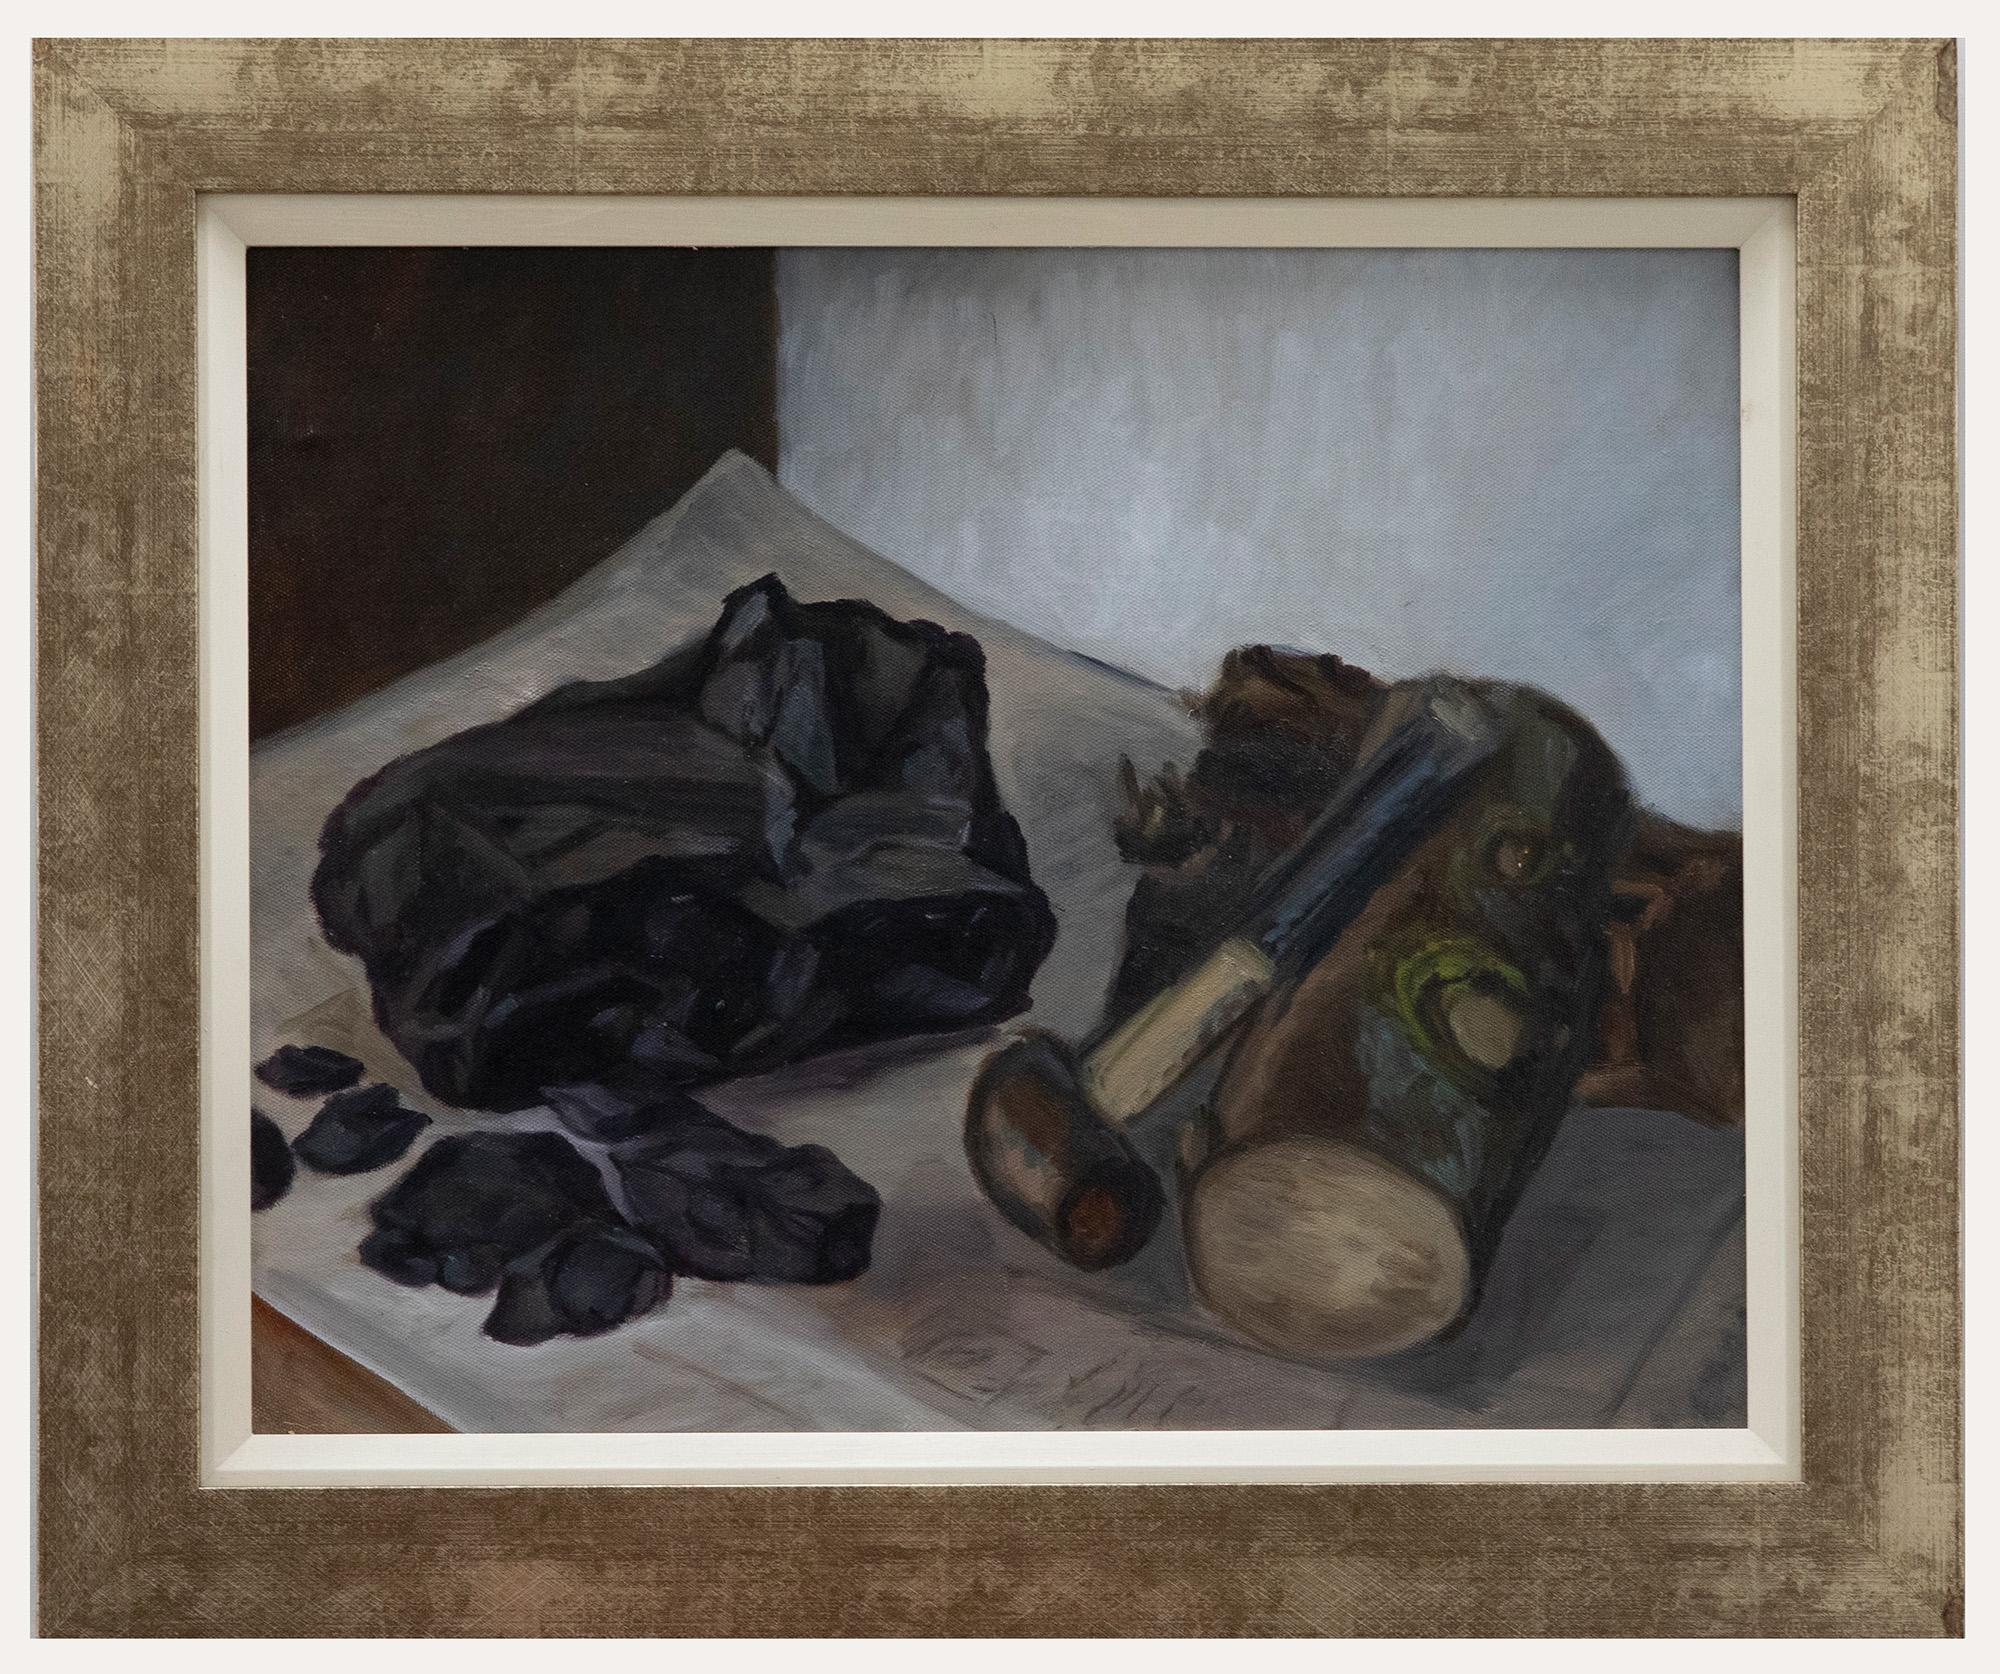 Unknown Still-Life Painting – Townsend - Contemporary Oil, Still Life, Wood & Coal